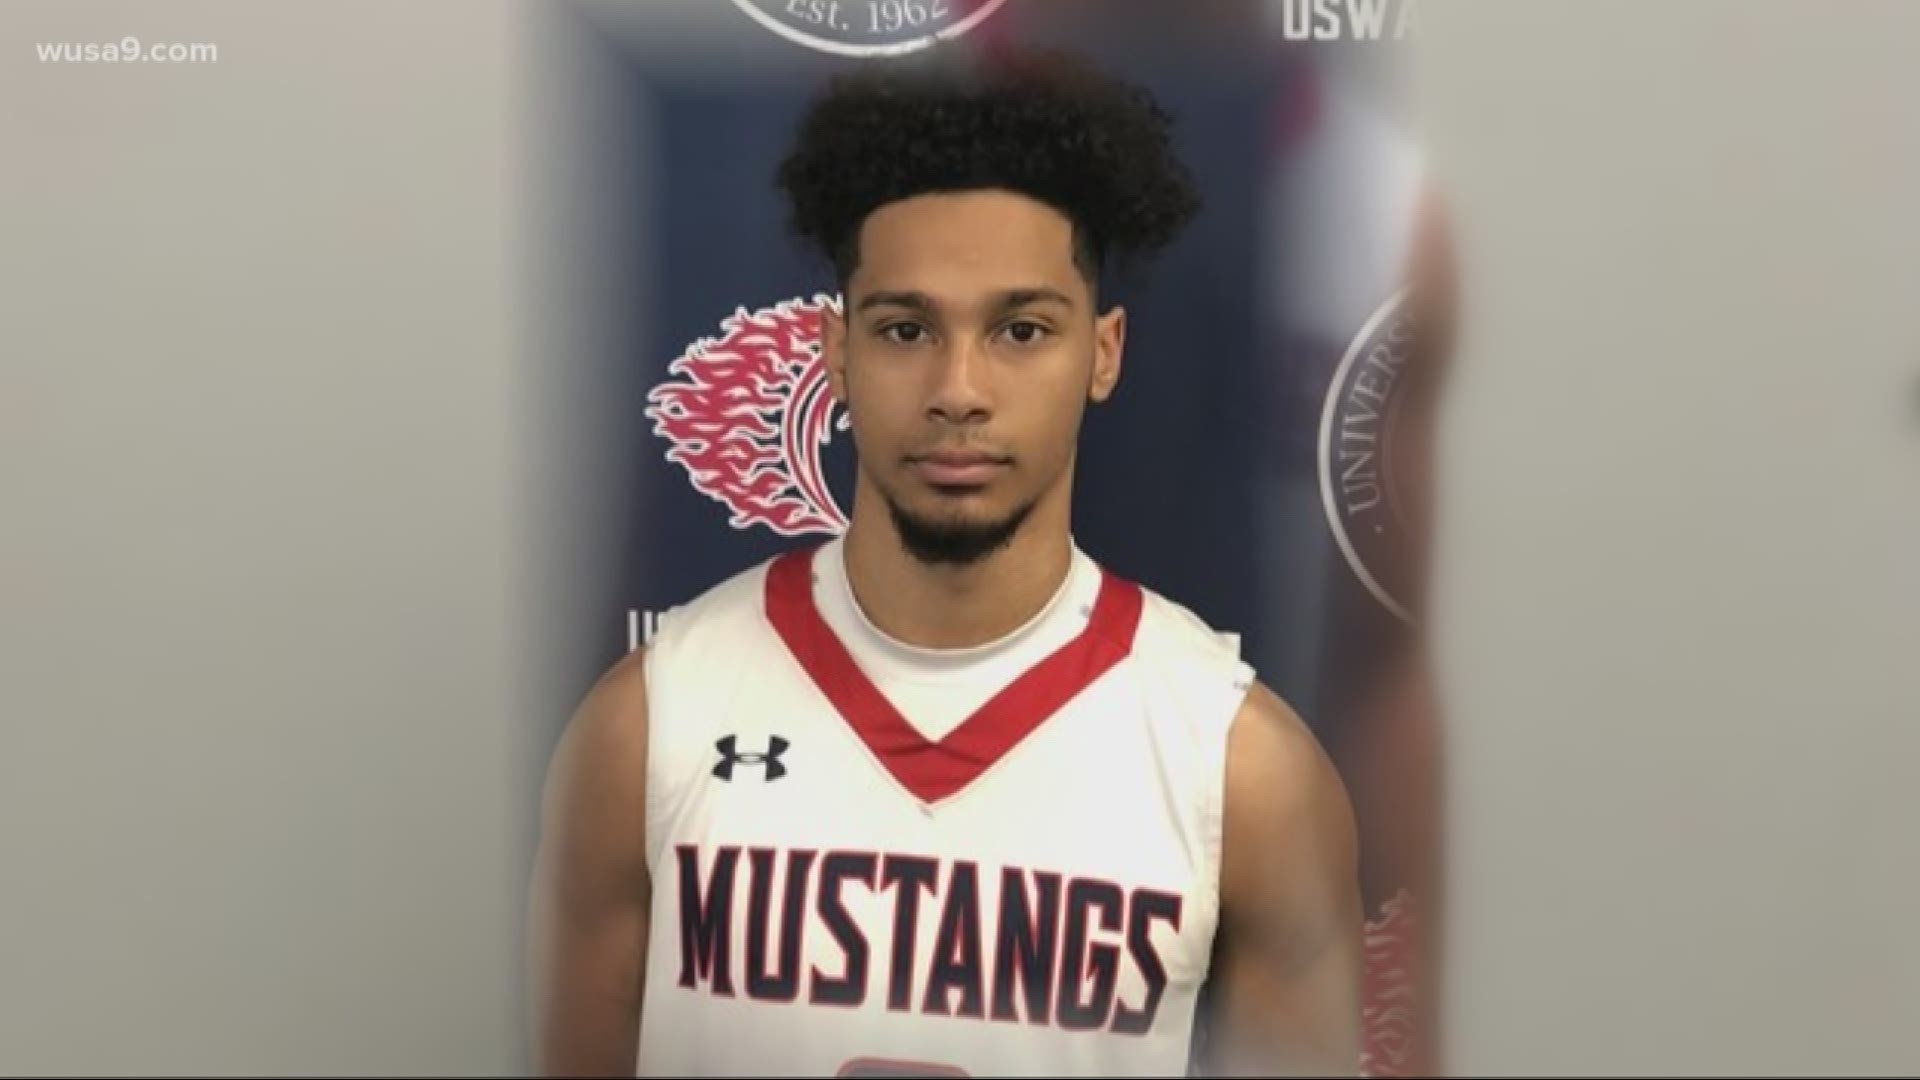 A house party turns deadly in New Mexico, and one of the victims is a college basketball player from our area -- Lamar Lee-Kane, Jr. Police say 7 people were shot in Hobbs, New Mexico early Sunday morning. 
3 people died and 4 others were injured.